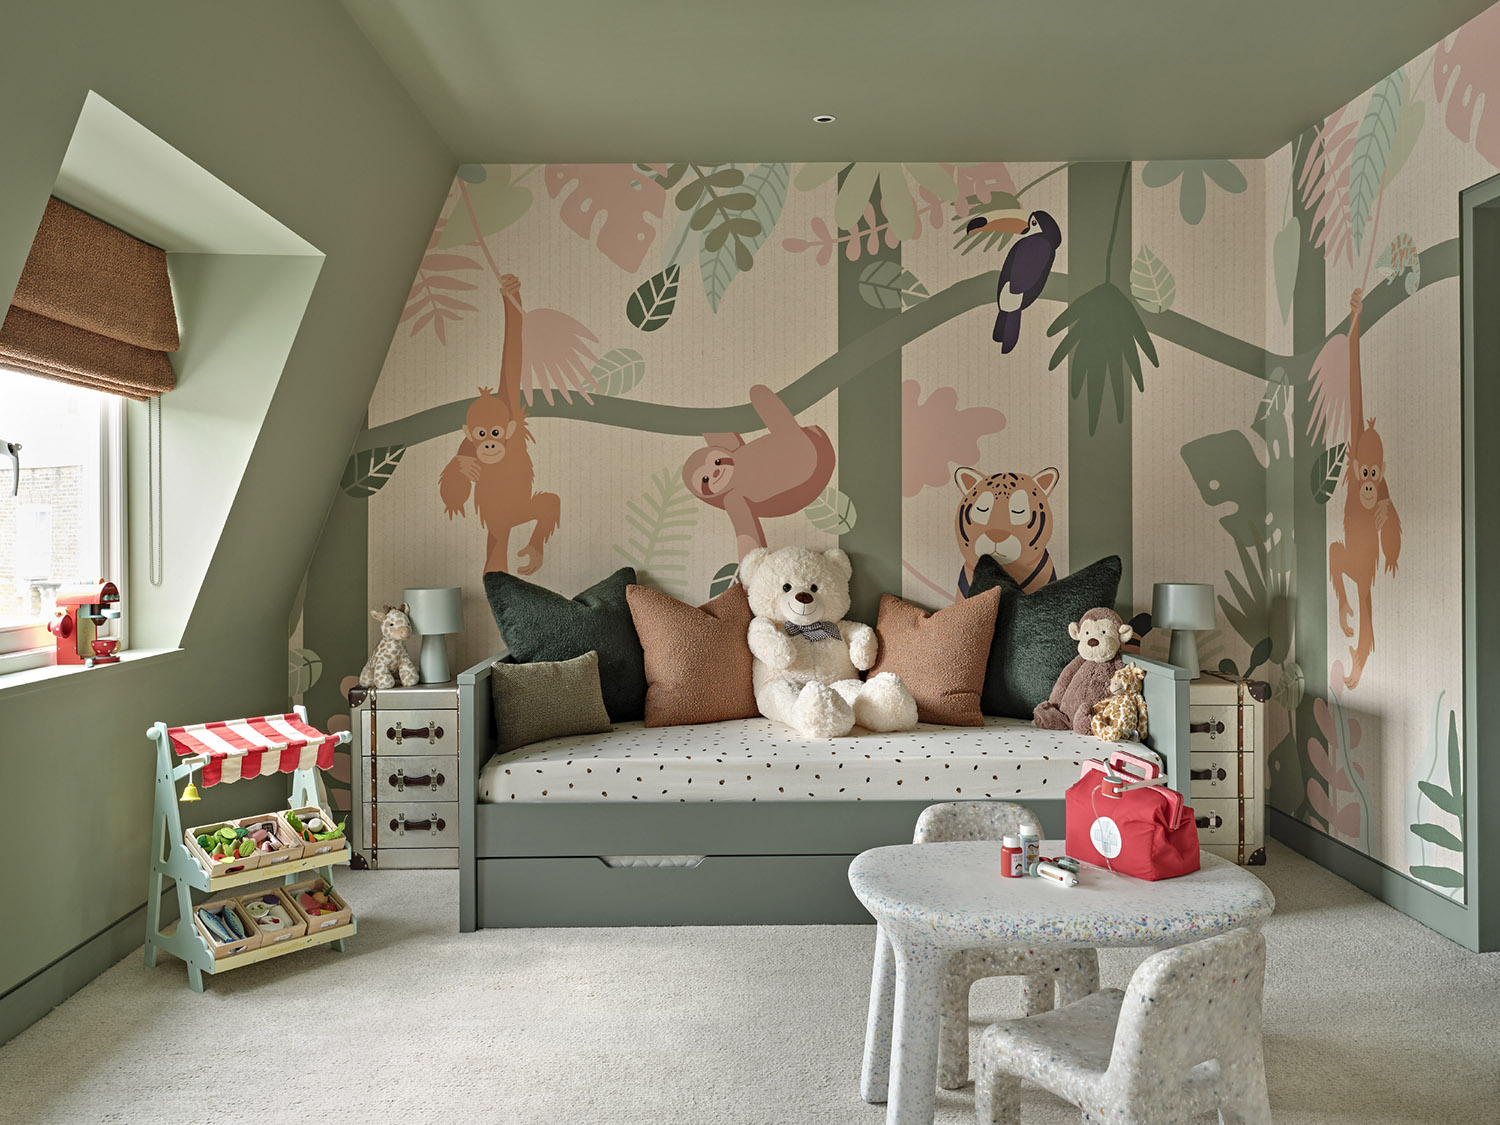 Kids bedroom advice - 10 expert design tips for making them look cool